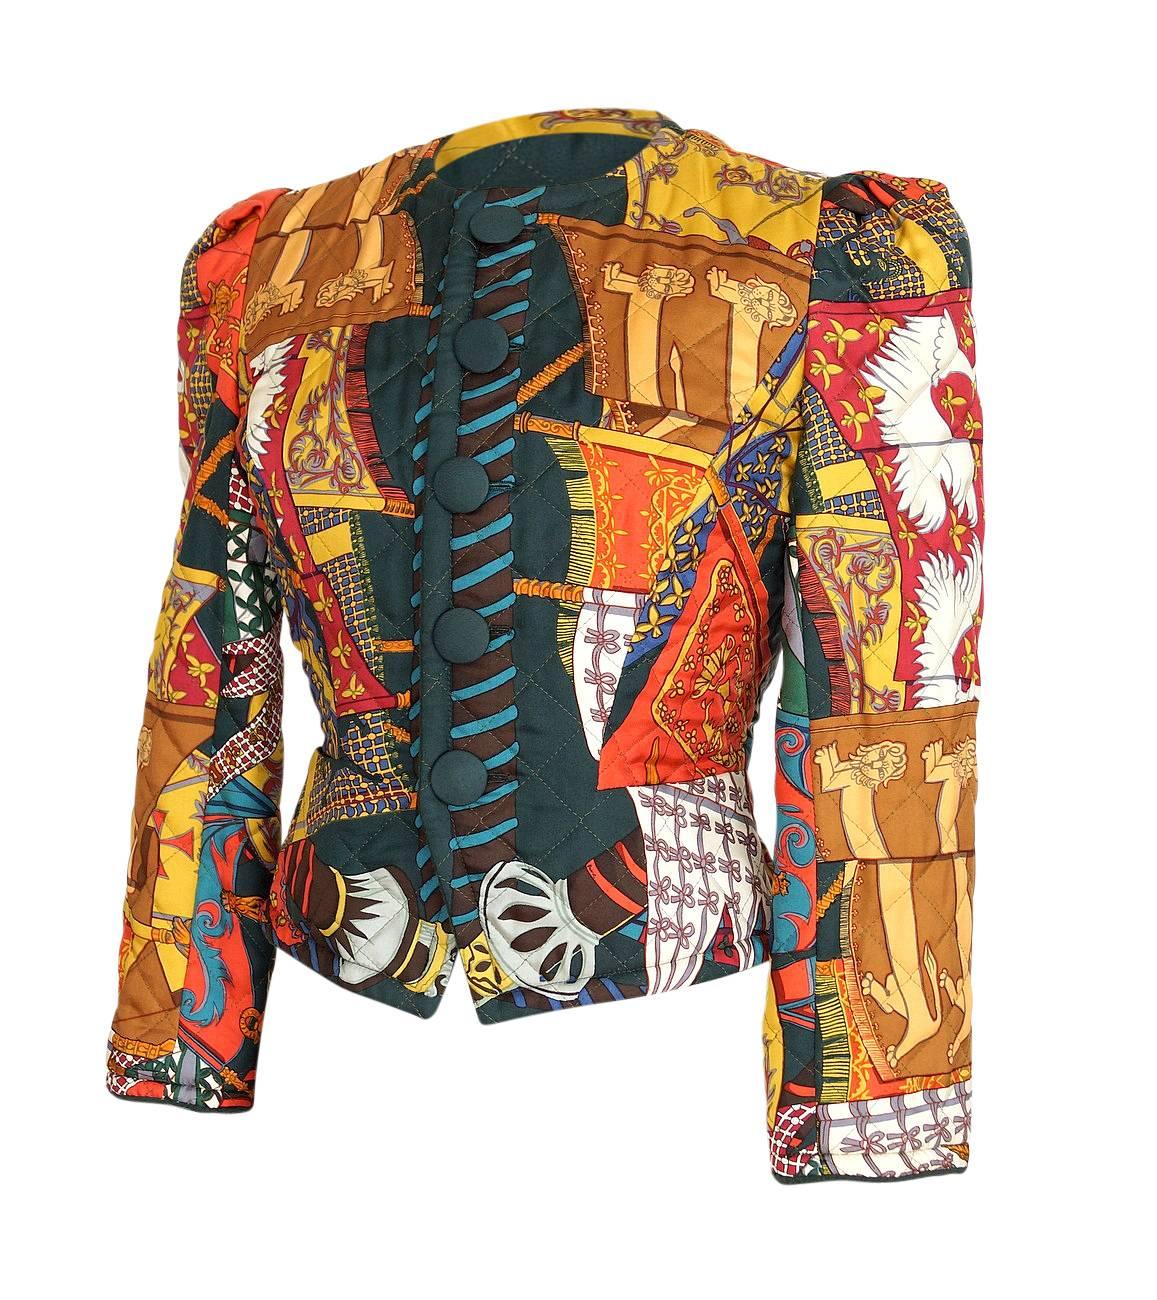 Extremely rare, magnificently shaped short Hermes scarf print jacket.
Etendards et Bannieres print created by Annie Faivre.
Flags and banners in lush shades of rich dark coral, hunter green, shades of brown, mustard gold, teal, greens and royal